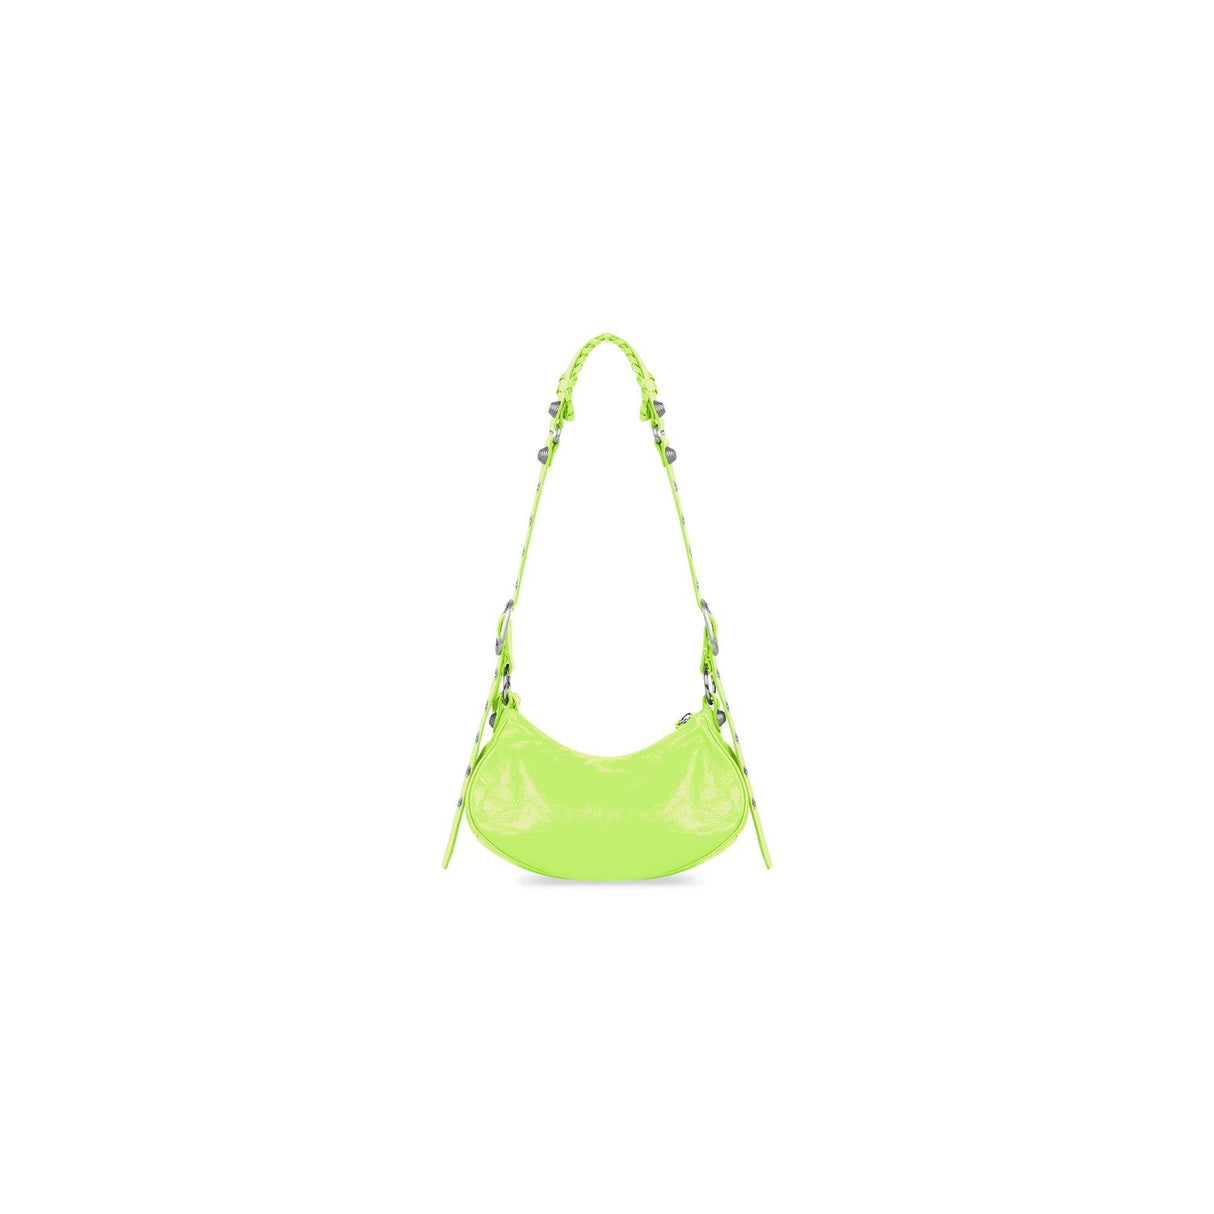 Neon Yellow Crossbody Handbag (in 100% Lambskin Leather) with Detachable Pouch and Mirror